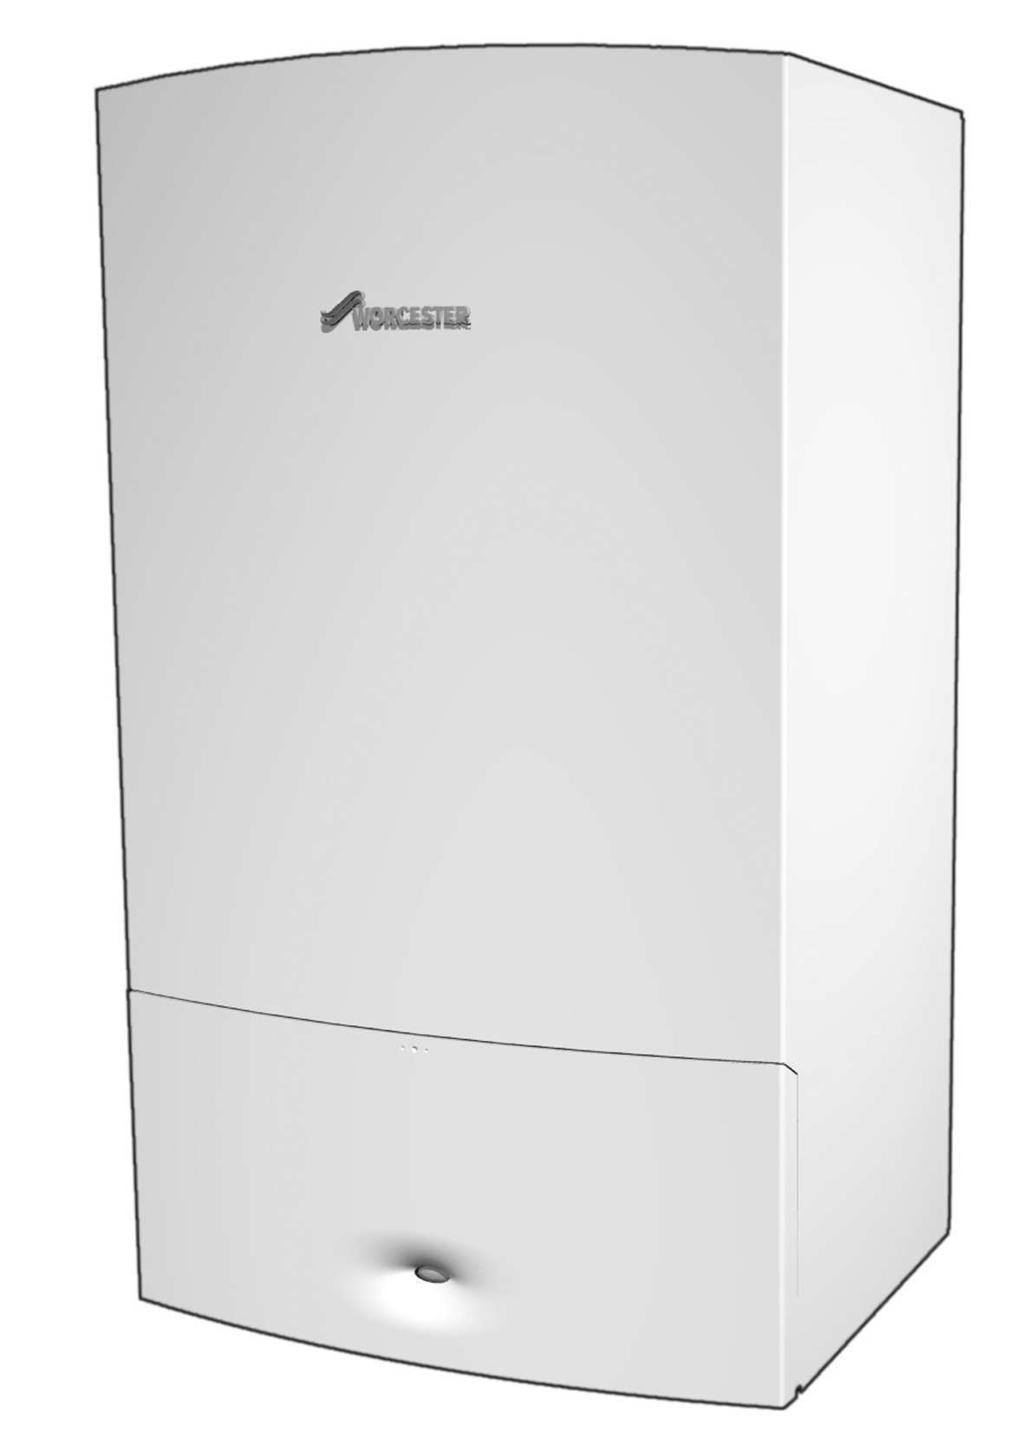 Greenstar 24i junior / 28i junior WALL HUNG GAS-FIRED CONDENSING COMBINATION BOILER FOR SEALED CENTRAL HEATING SYSTEMS & DOMESTIC HOT WATER THIS APPLIANCE IS FOR USE WITH NATURAL GAS OR LPG (Cat II